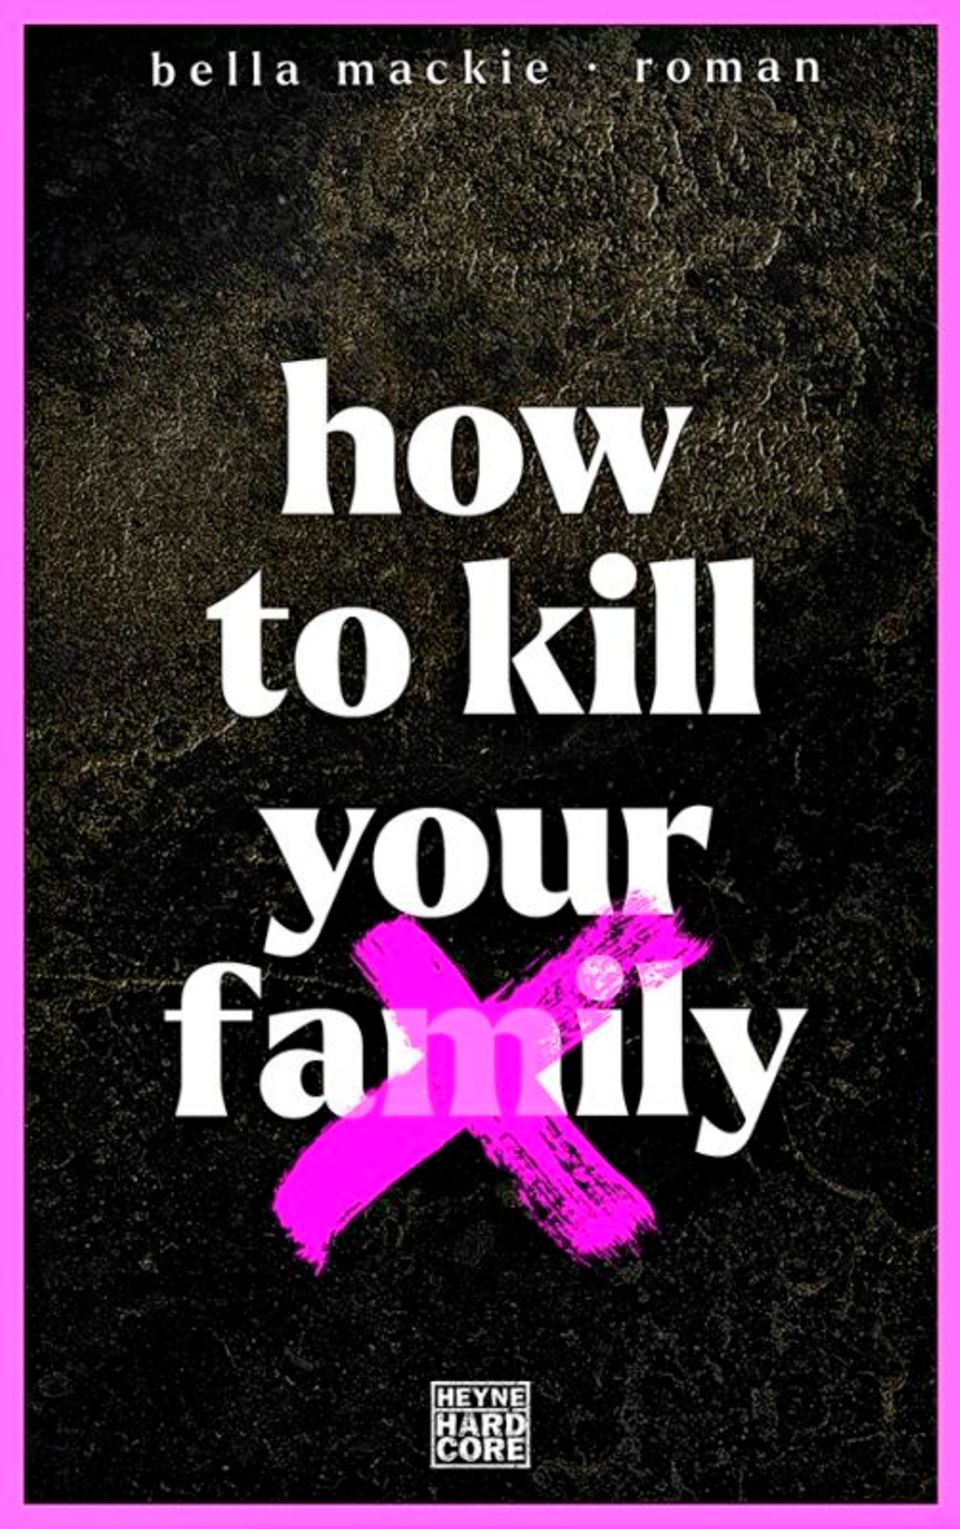 Buchtipps der Redaktion: Buchcover "How to kill your family"